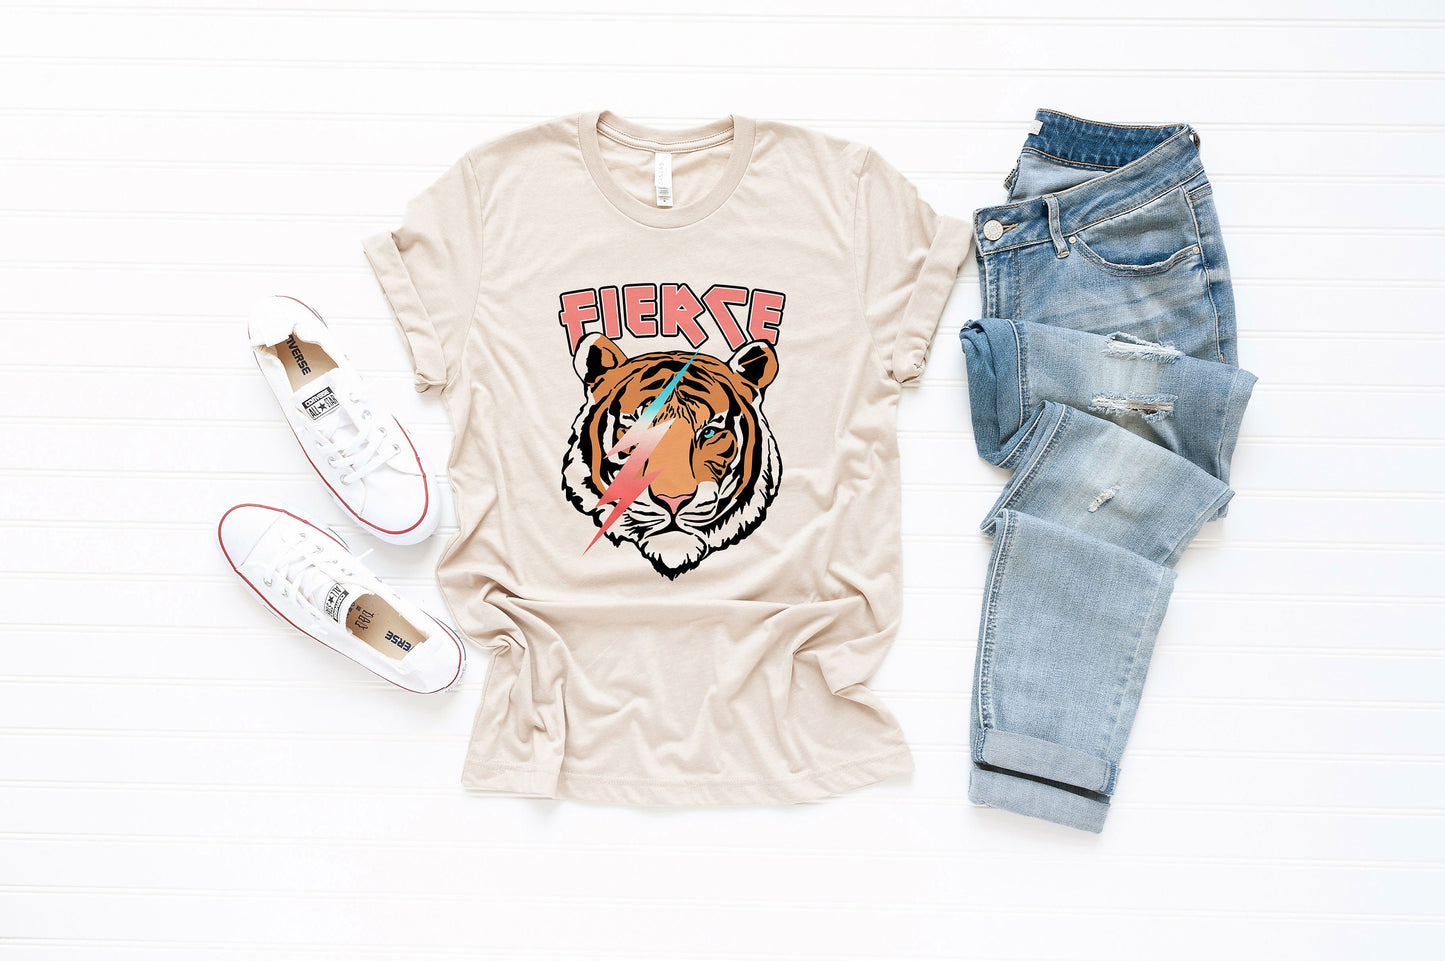 Fierce Eye of The Tiger Animal Ultra Soft Graphic Tee Unisex Soft Tee T-shirt for Women or Men